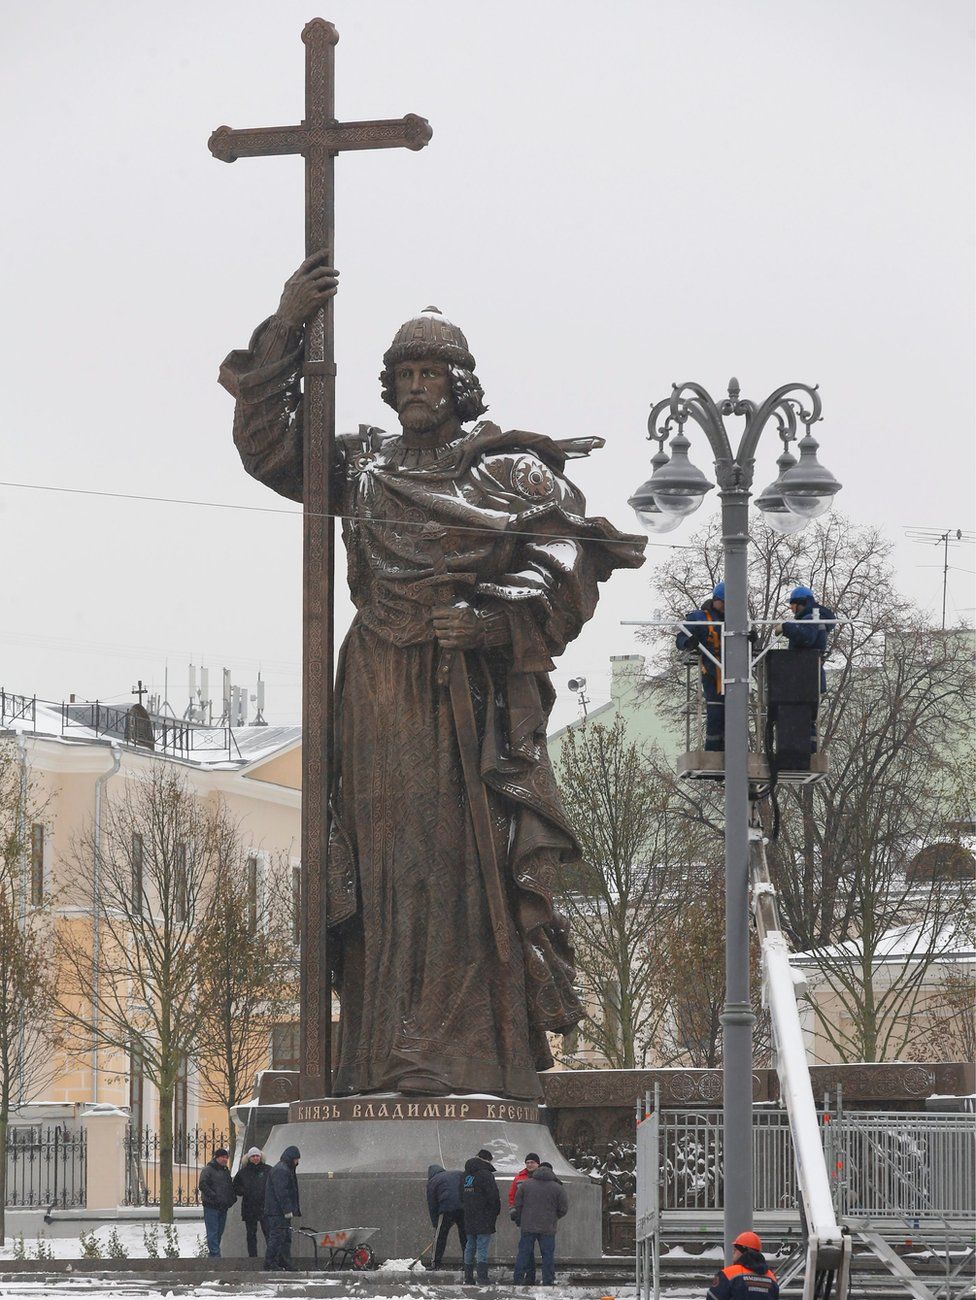 Municipal workers make the last preparations for unveiling the monument to St Vladimir in front of the Kremlin in Moscow, Russia, 3 November 2016